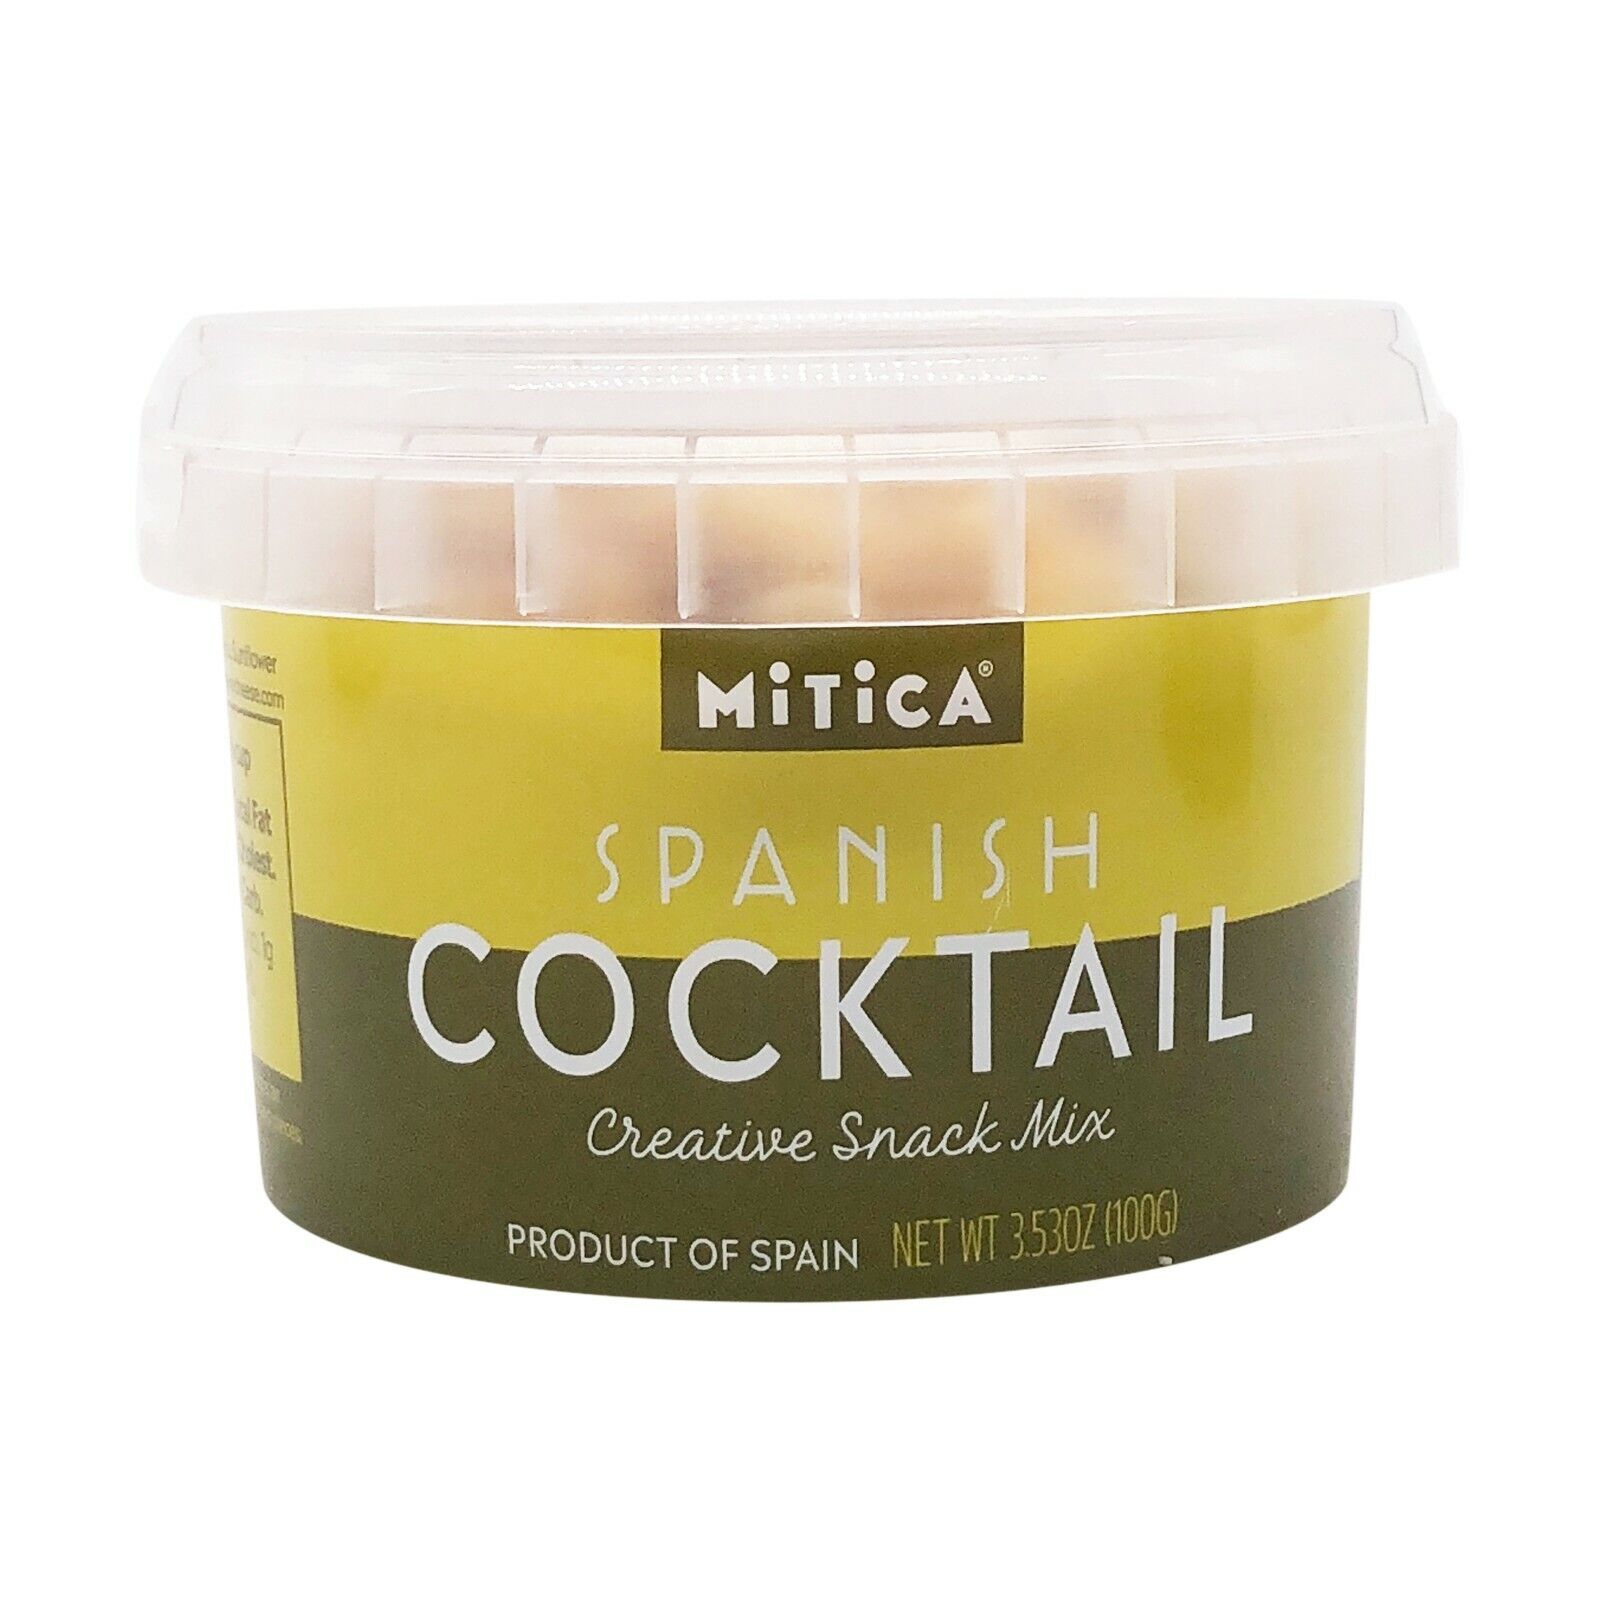 Mitica Spanish Cocktail Mix, 3.53 OZ Tubs, Case of 12 Tubs